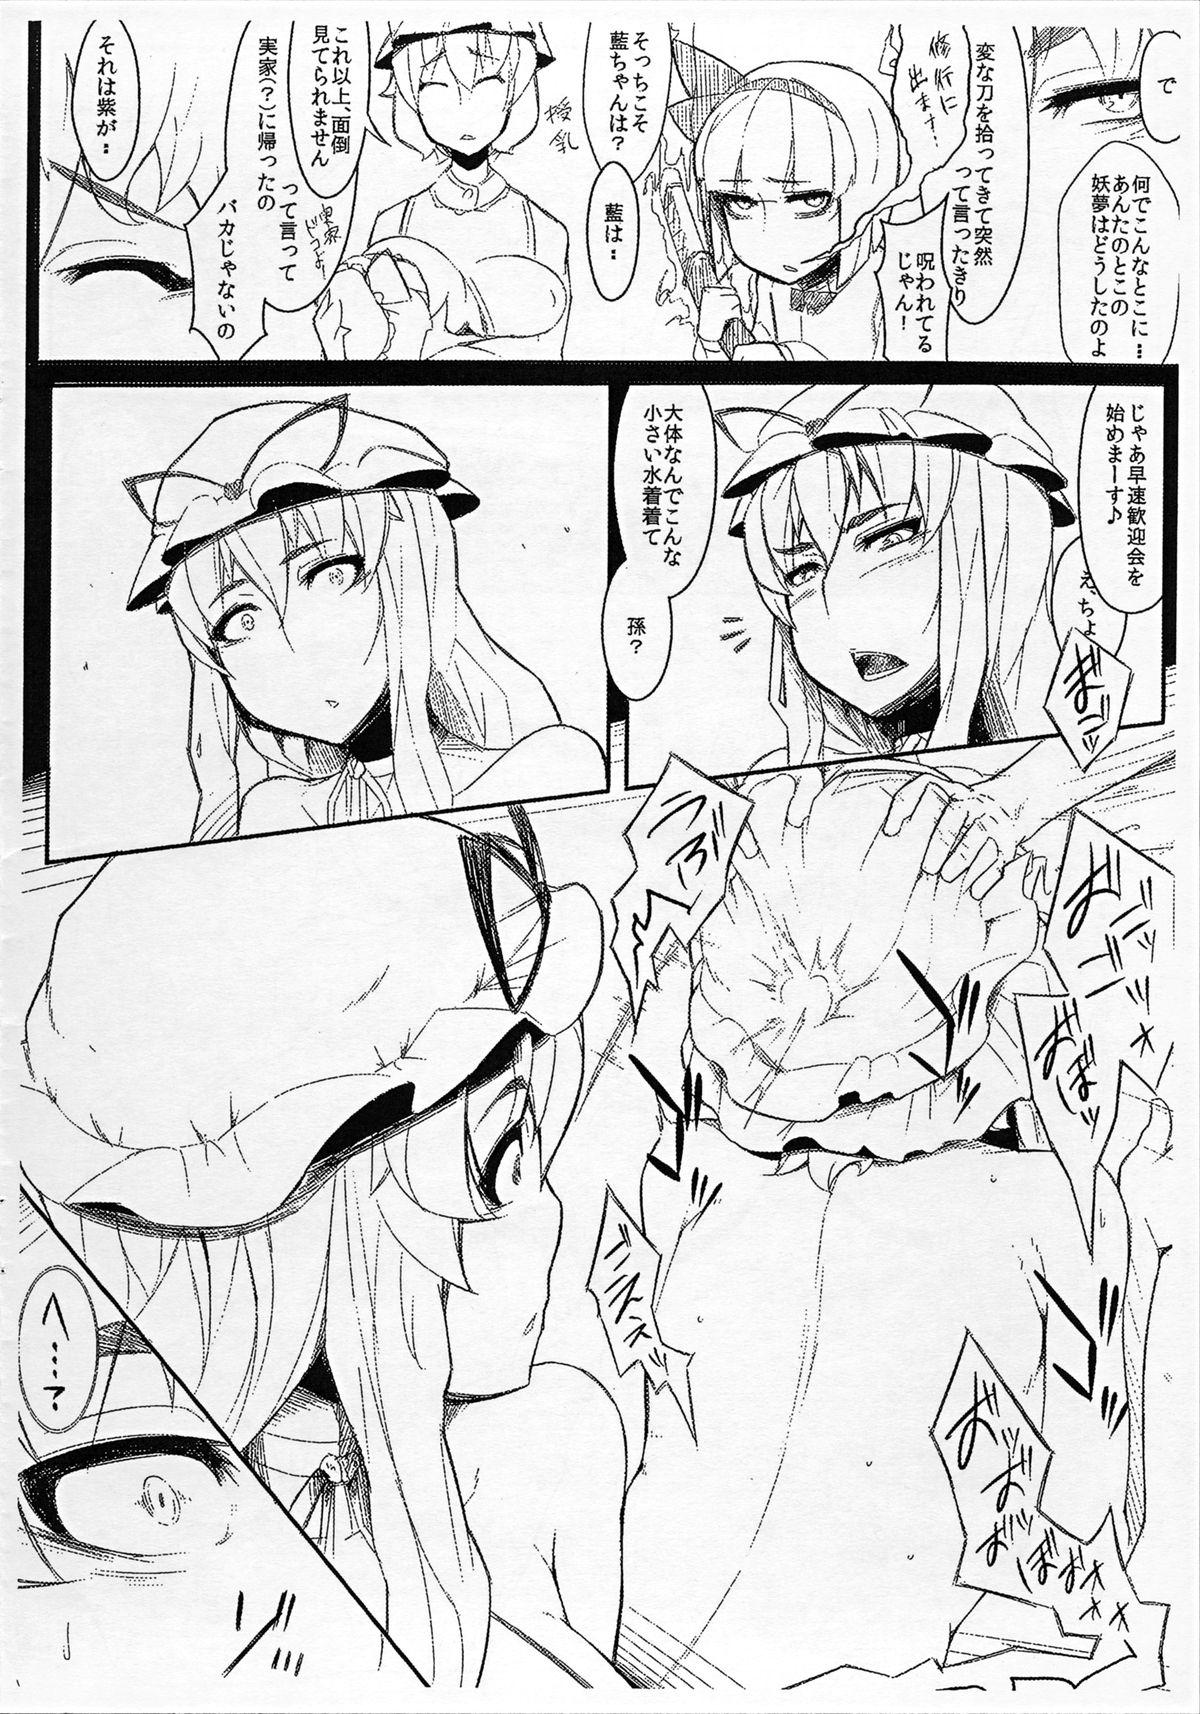 Long Hair Toshimaen e Youkoso Vol. 0 - Touhou project Nice Tits - Page 3